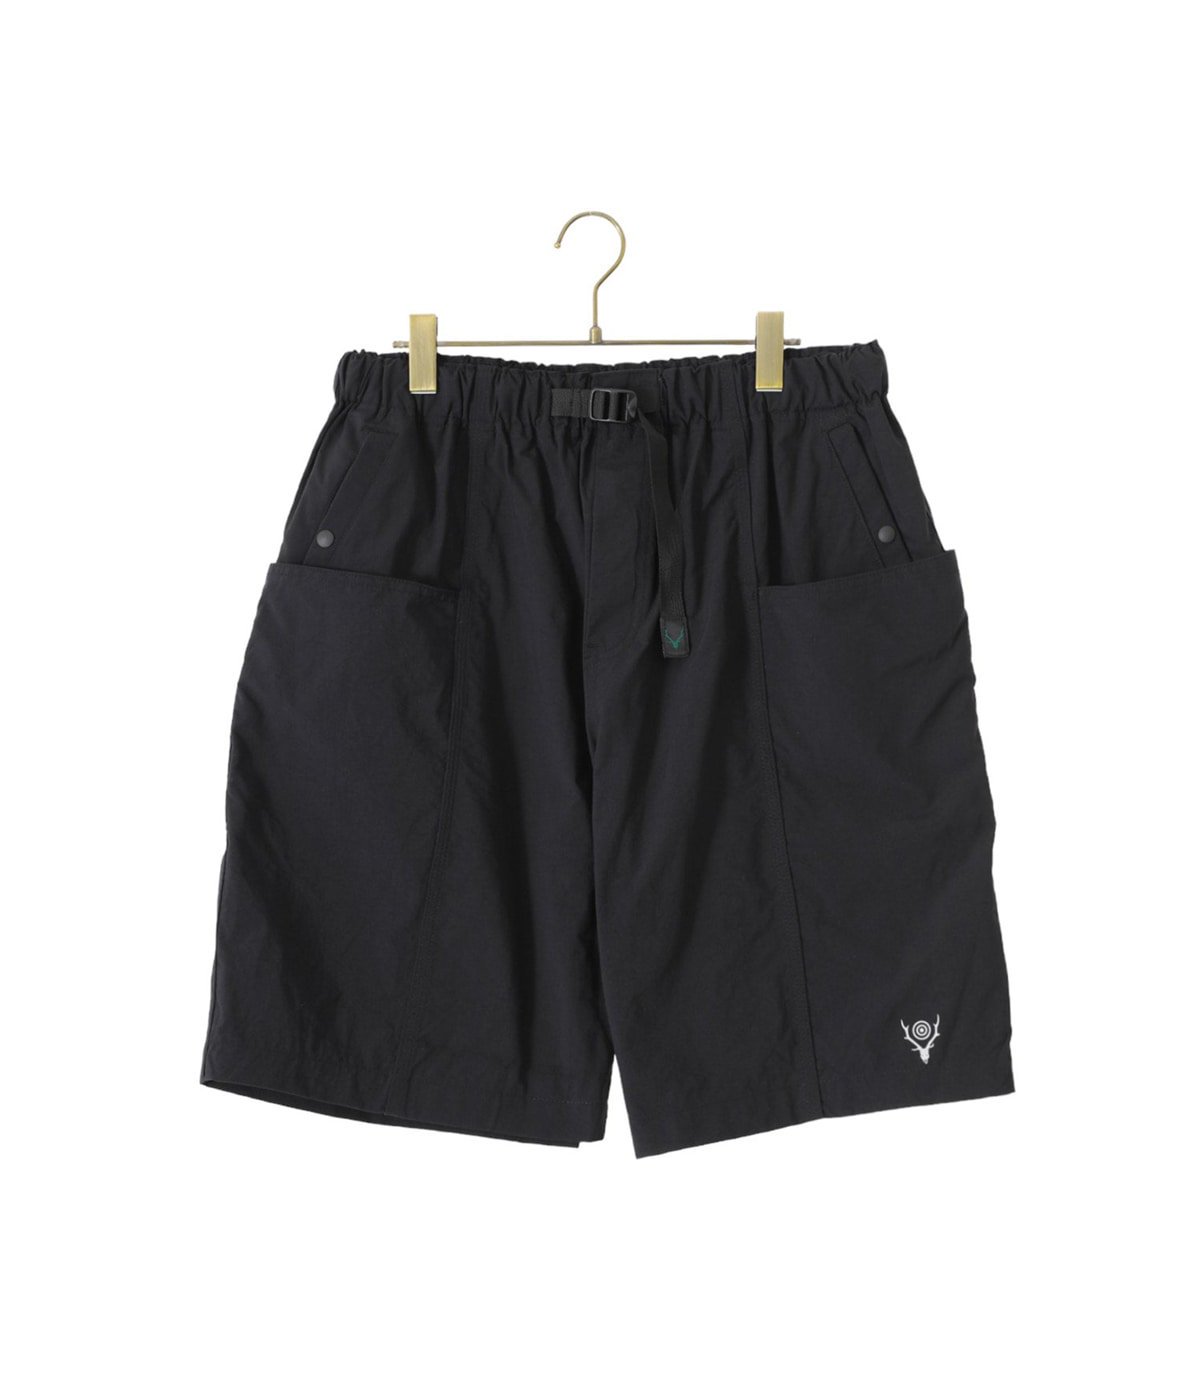 Belted C.S. Short - Nylon Ox ford | South2 West8(サウスツー 